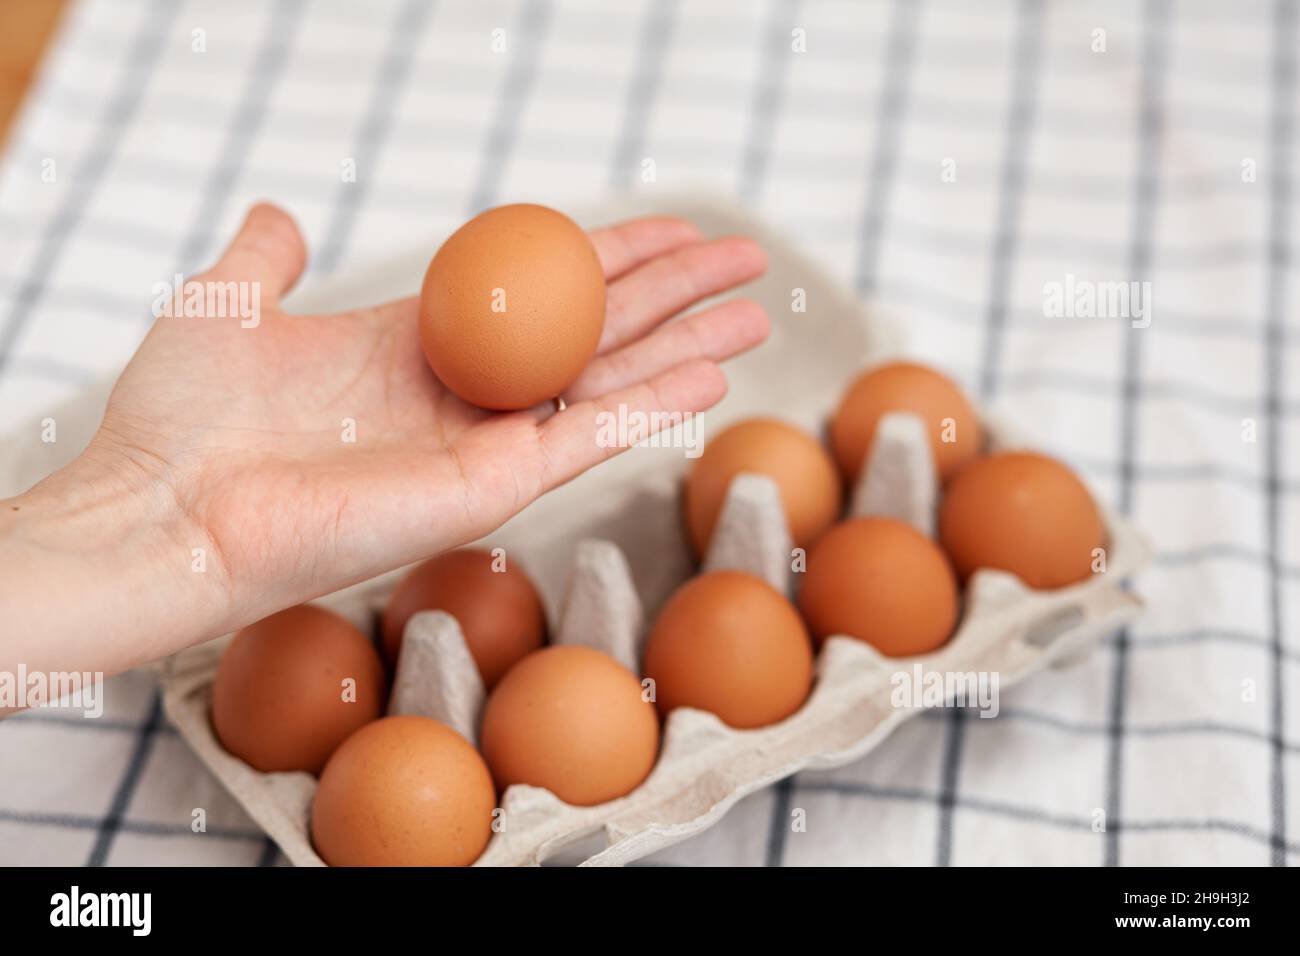 Chicken brown eggs are in a cardboard box bought at a grocery store. Healthy breakfast. A tray for carrying and storing fragile eggs. Woman takes one Stock Photo